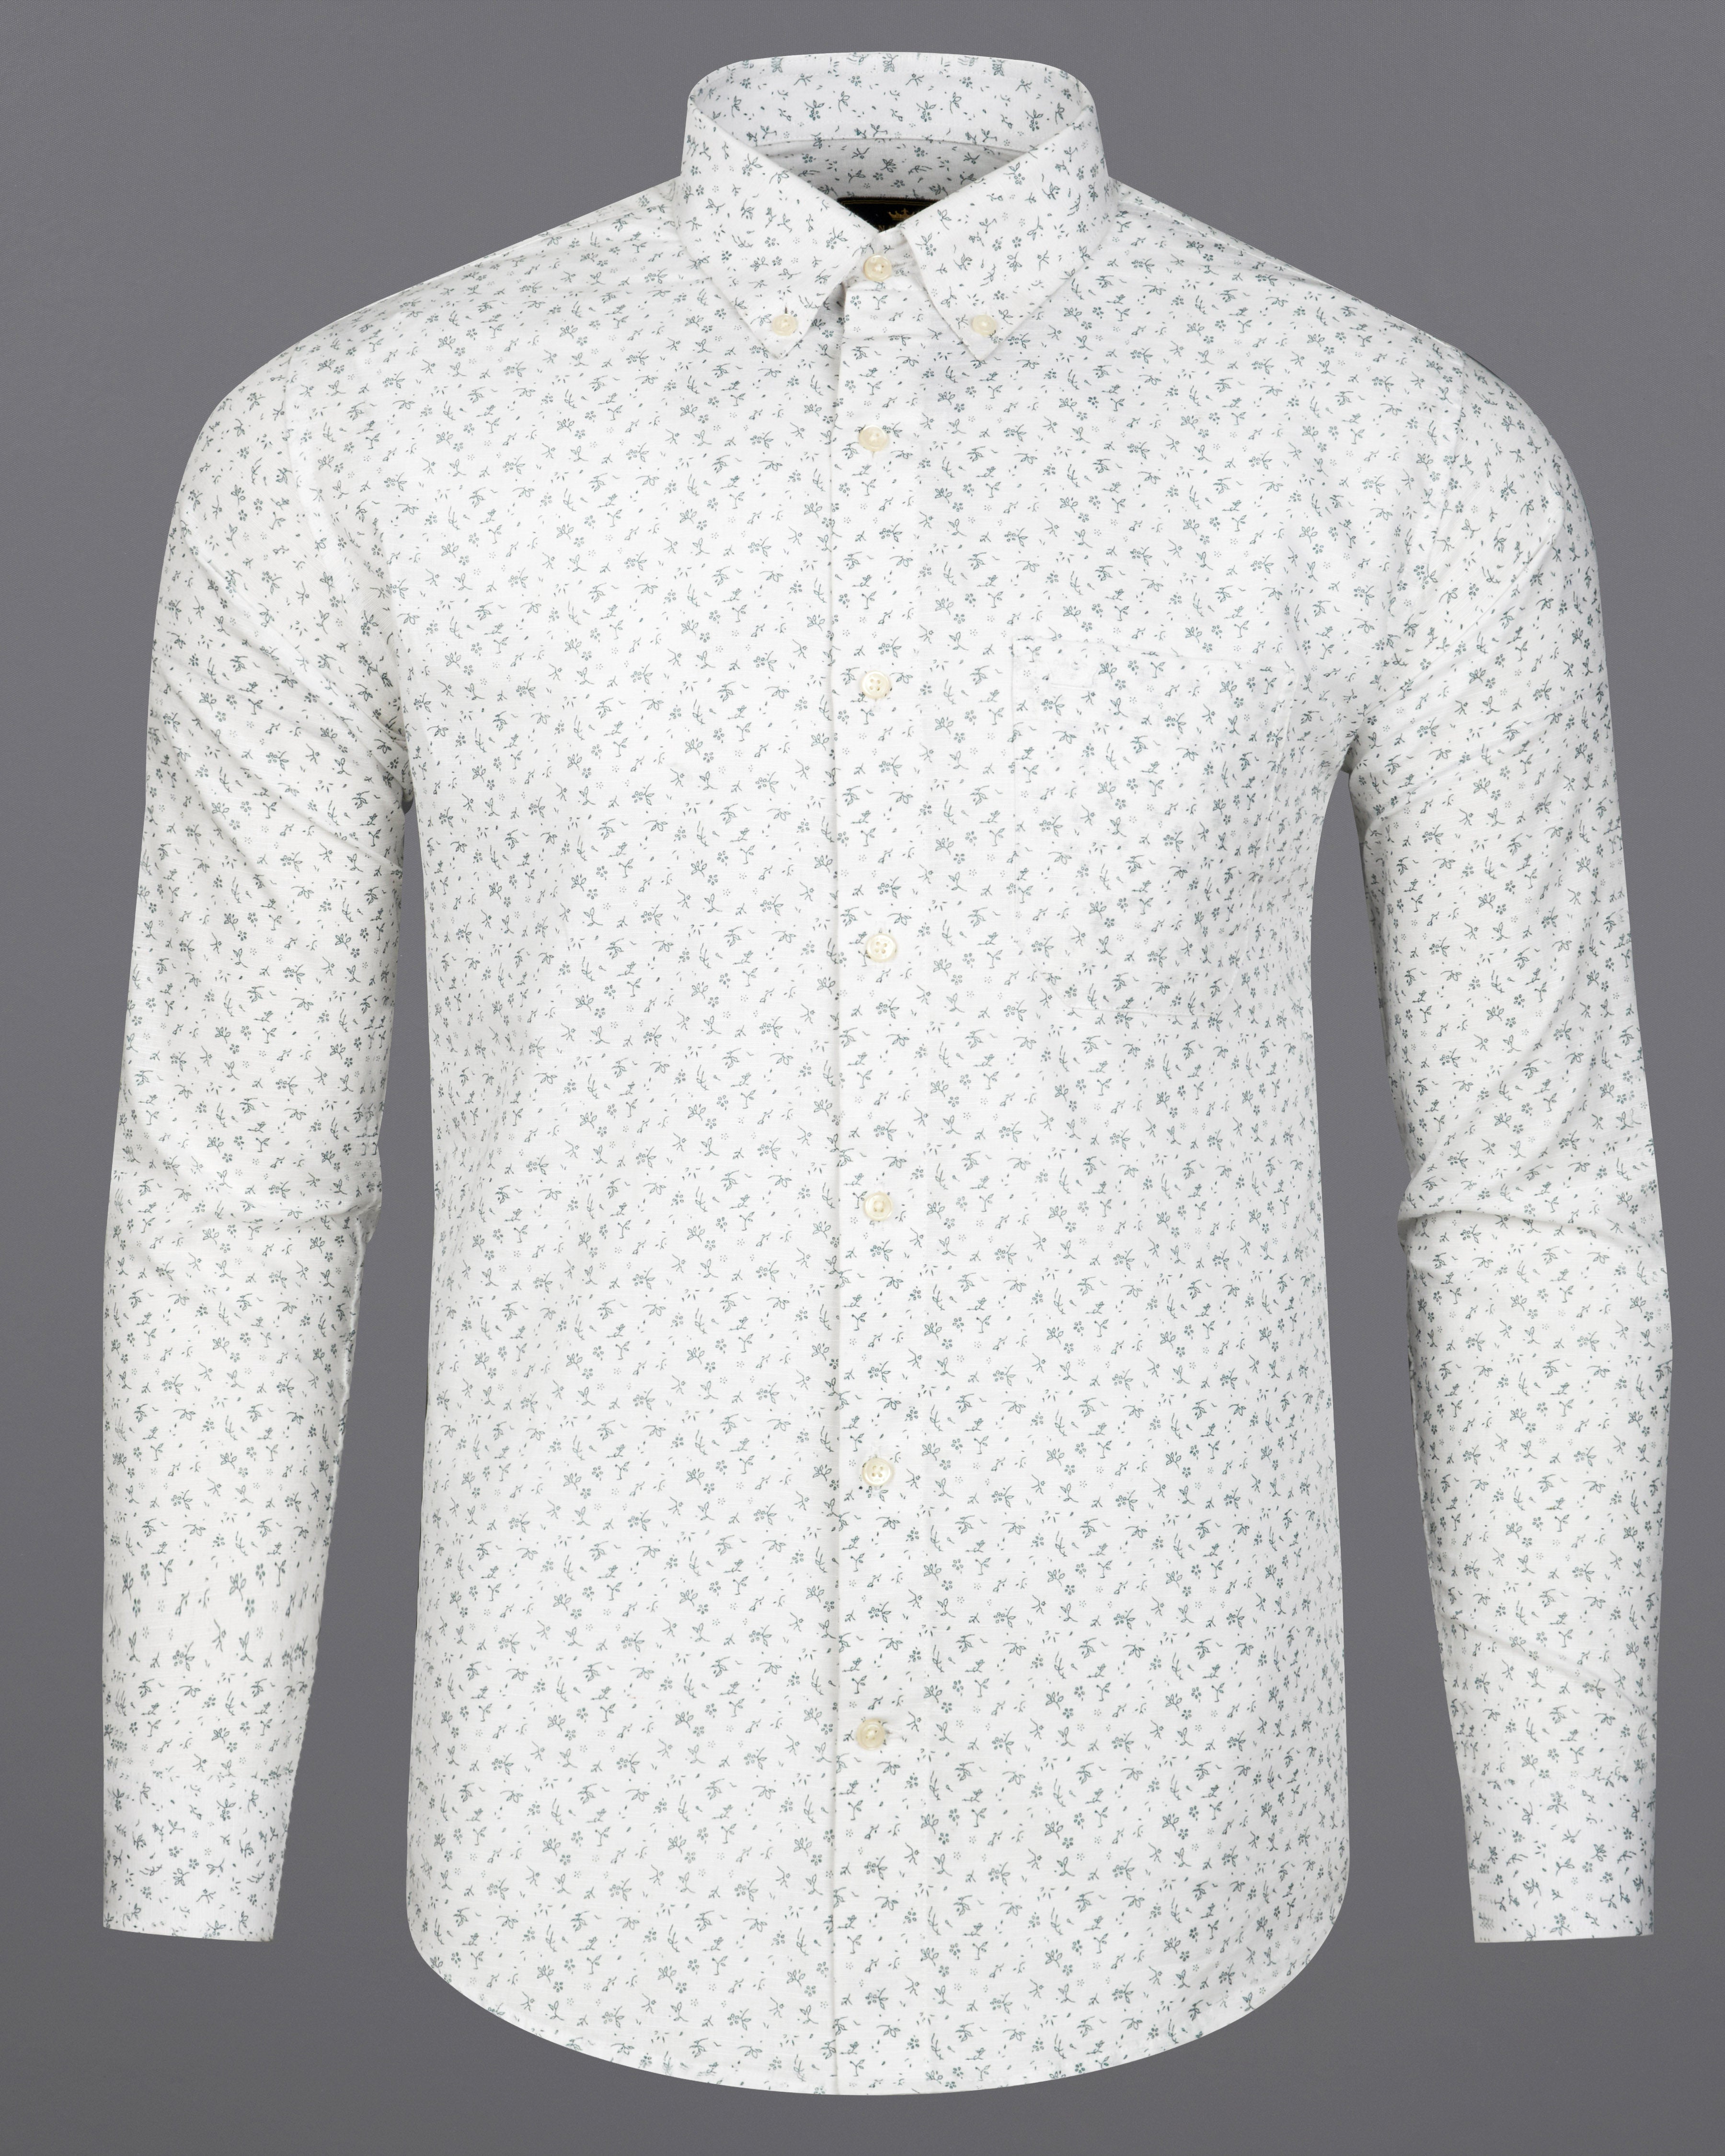 Bright White Ditsy Textured Luxurious Linen Shirt